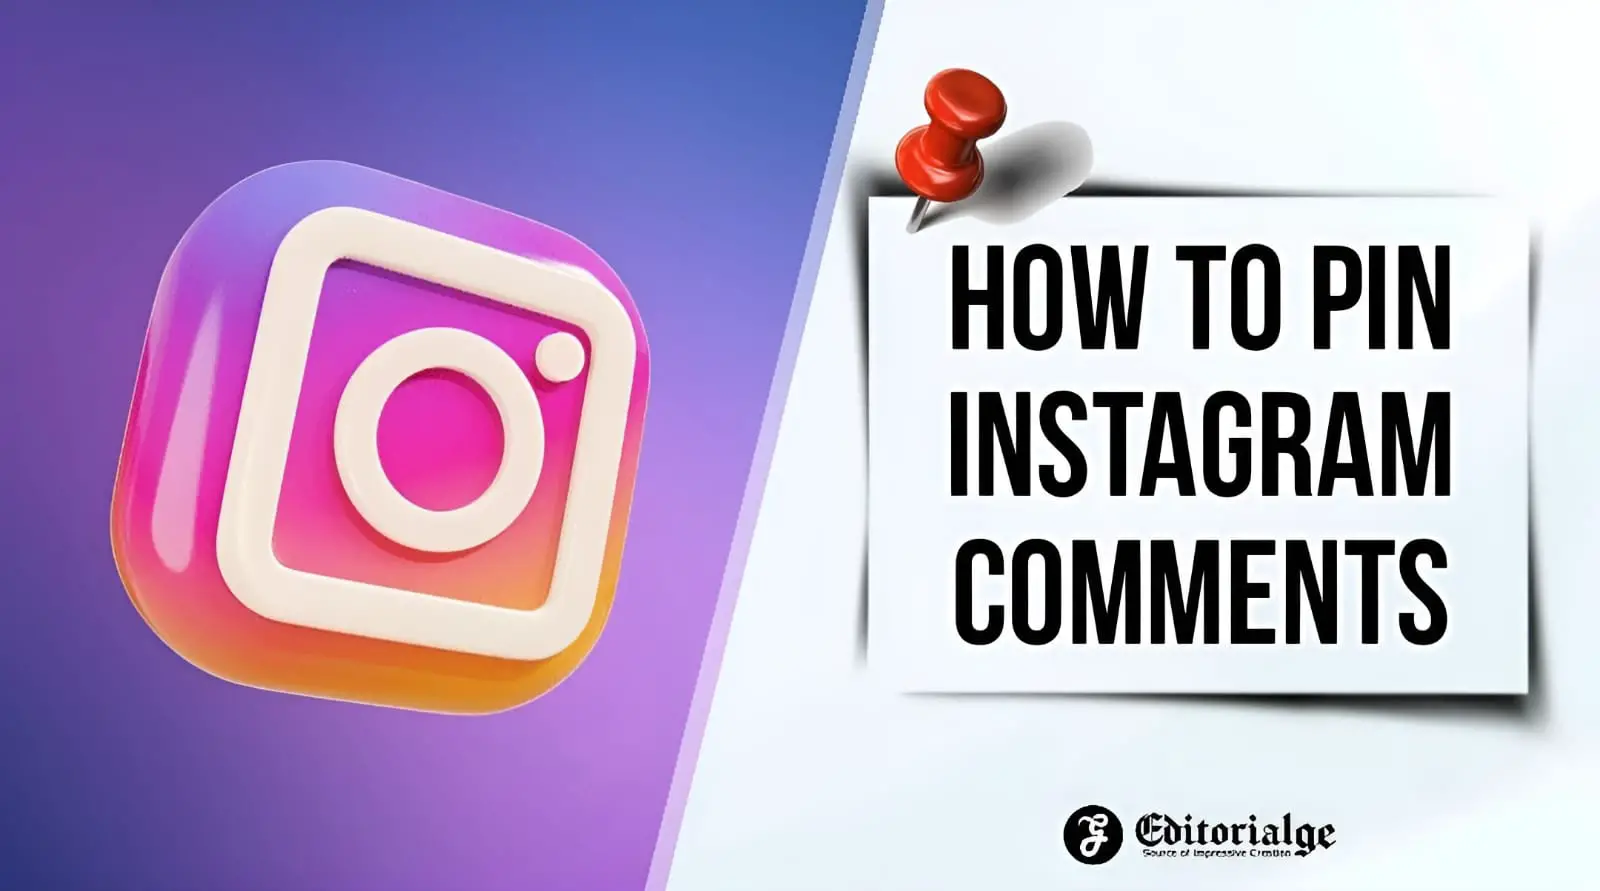 How to Pin Instagram Comments